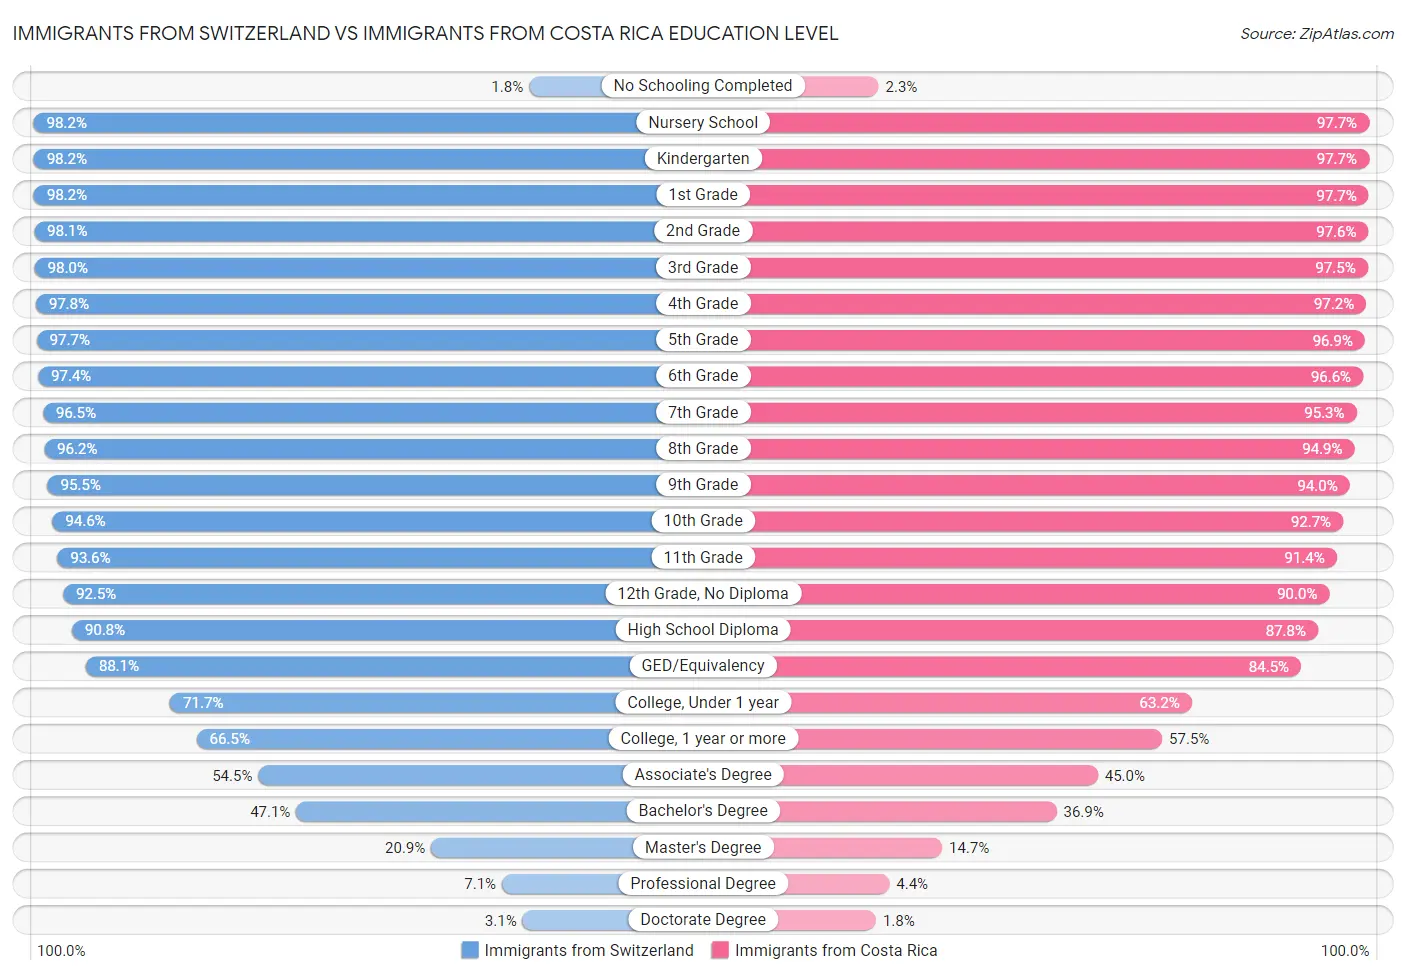 Immigrants from Switzerland vs Immigrants from Costa Rica Education Level